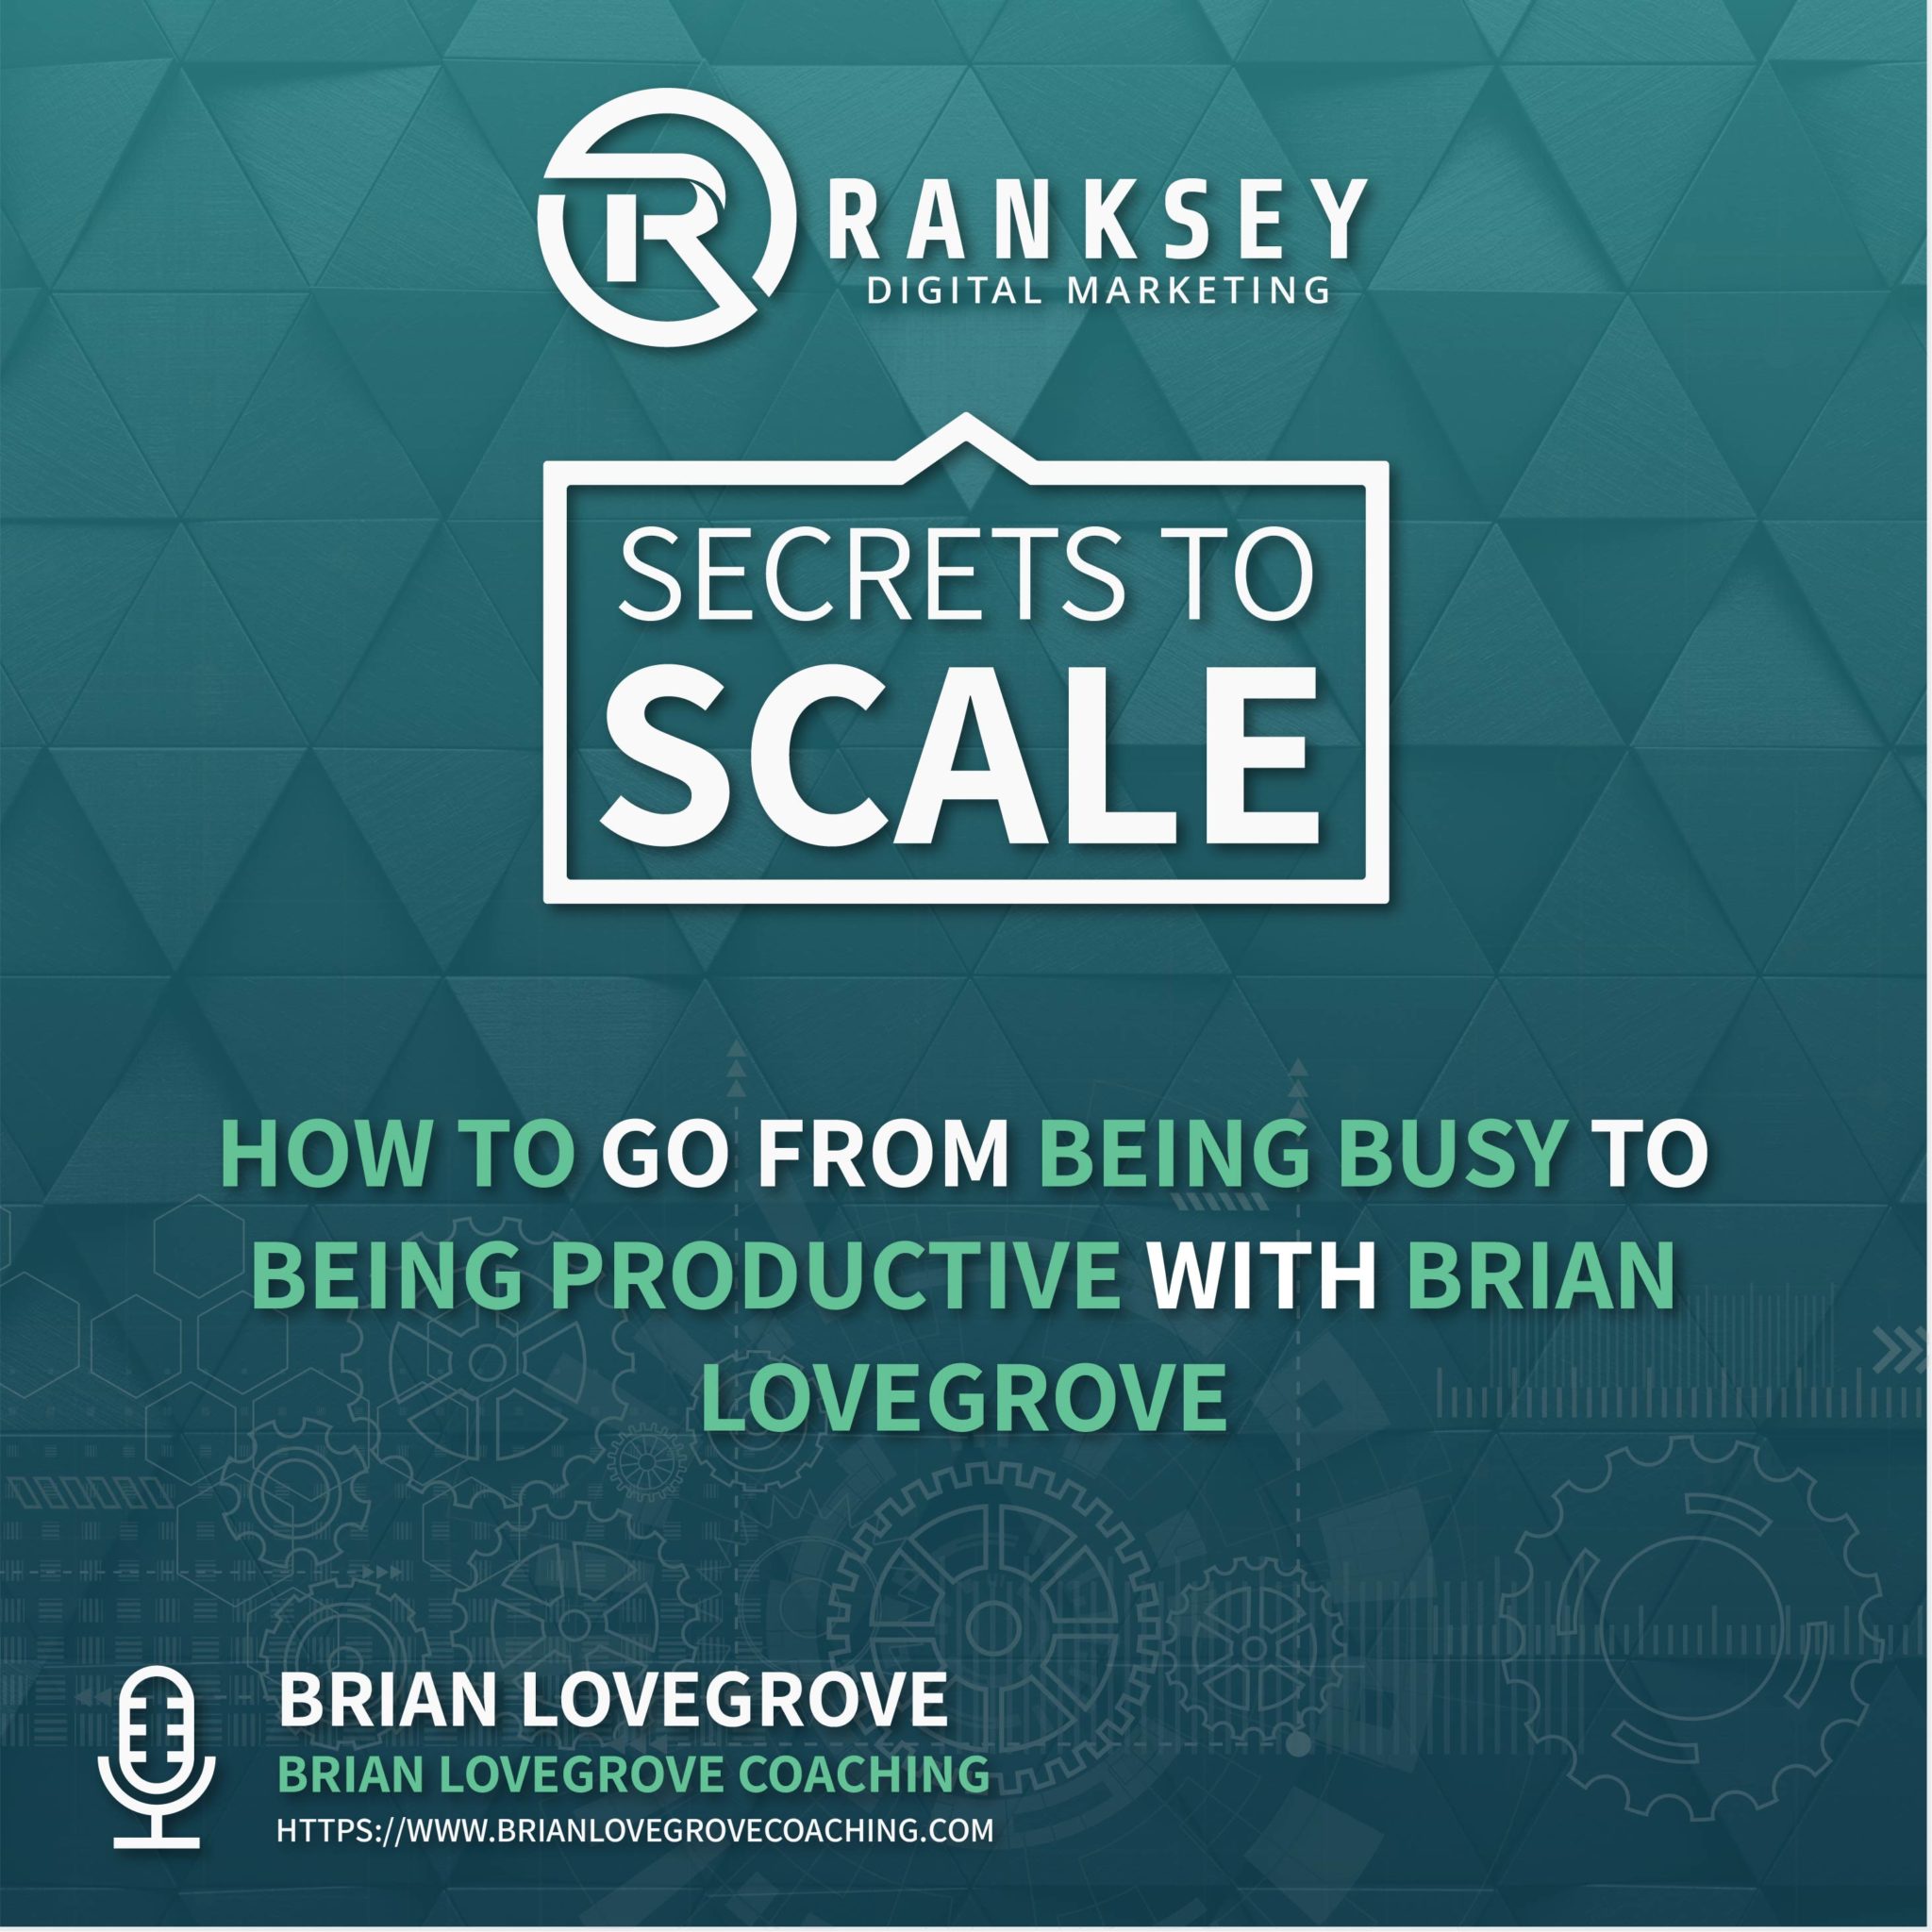 055 - How to Go From Being Busy to Being Productive with Brian Lovegrove